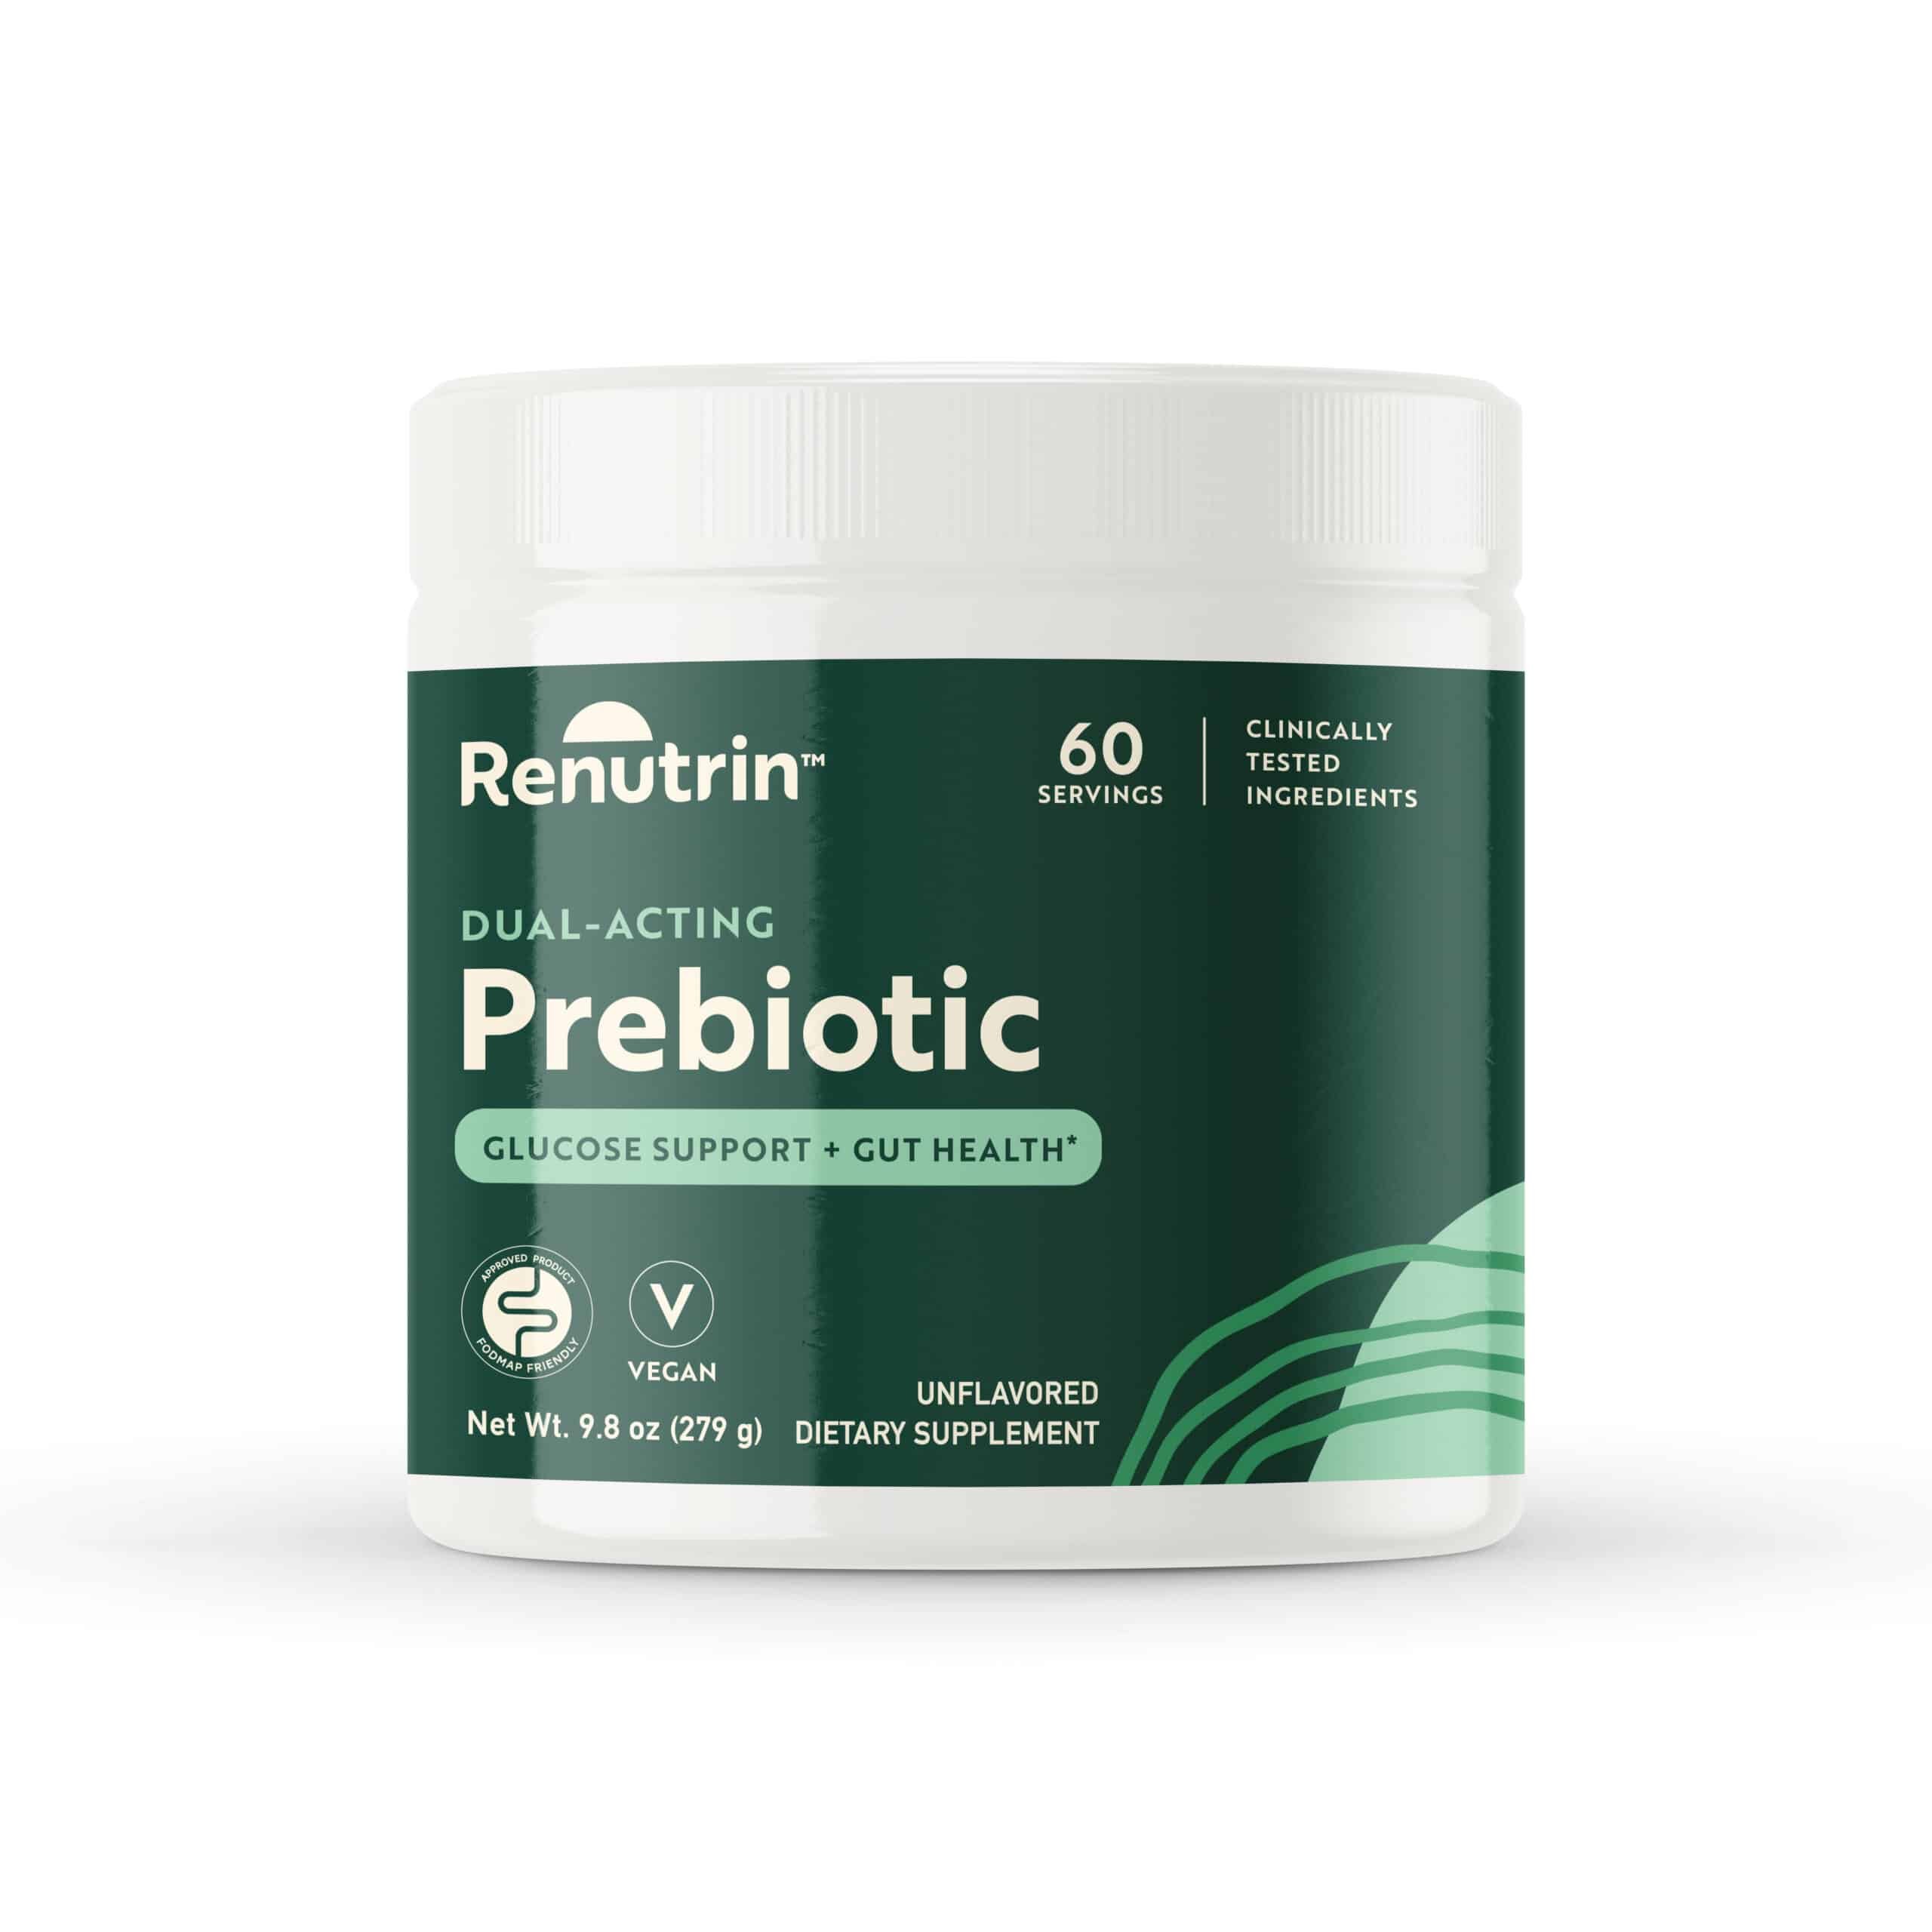 Renutrin Prebiotic Supplement Label Design is green, with light green elements and bold fonts.